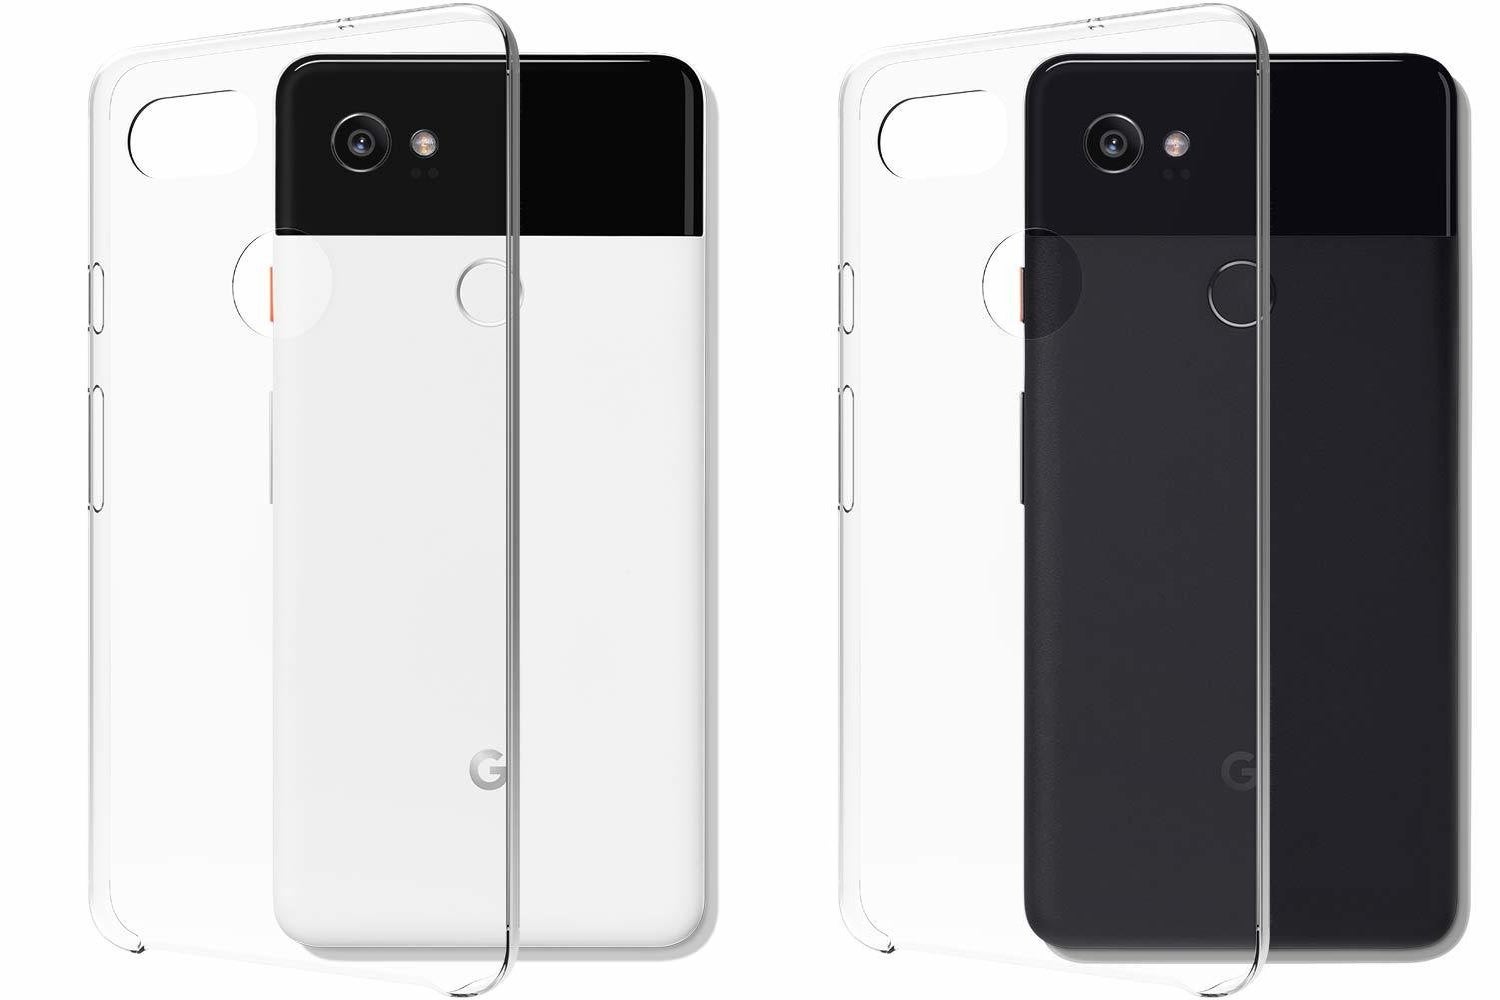 The best thin cases for the Google Pixel 2 XL